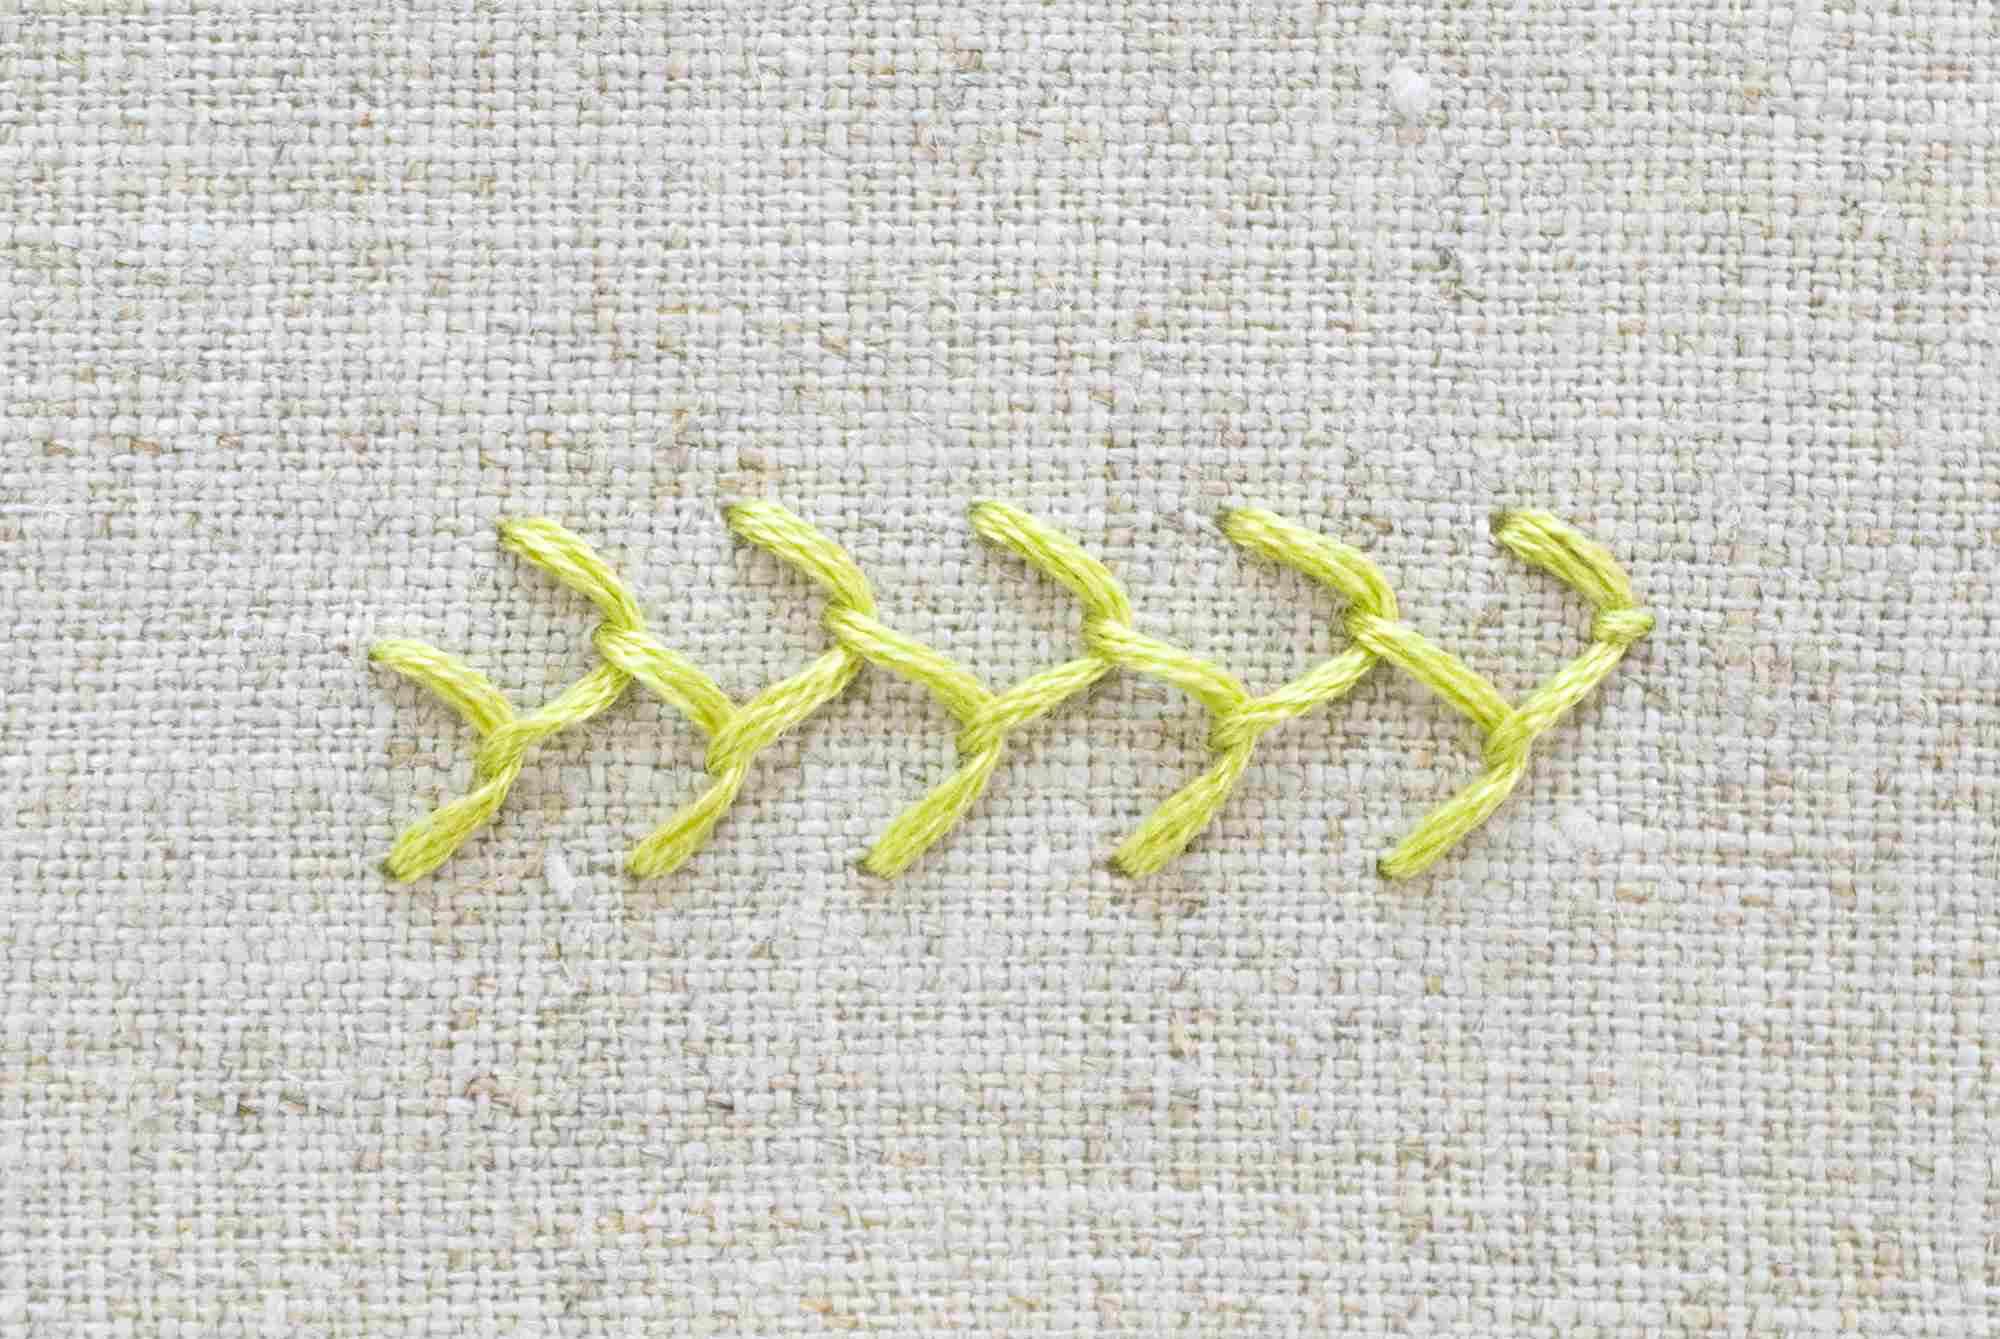 Embroidery Stitch Patterns 15 Stitches Every Embroiderer Should Know